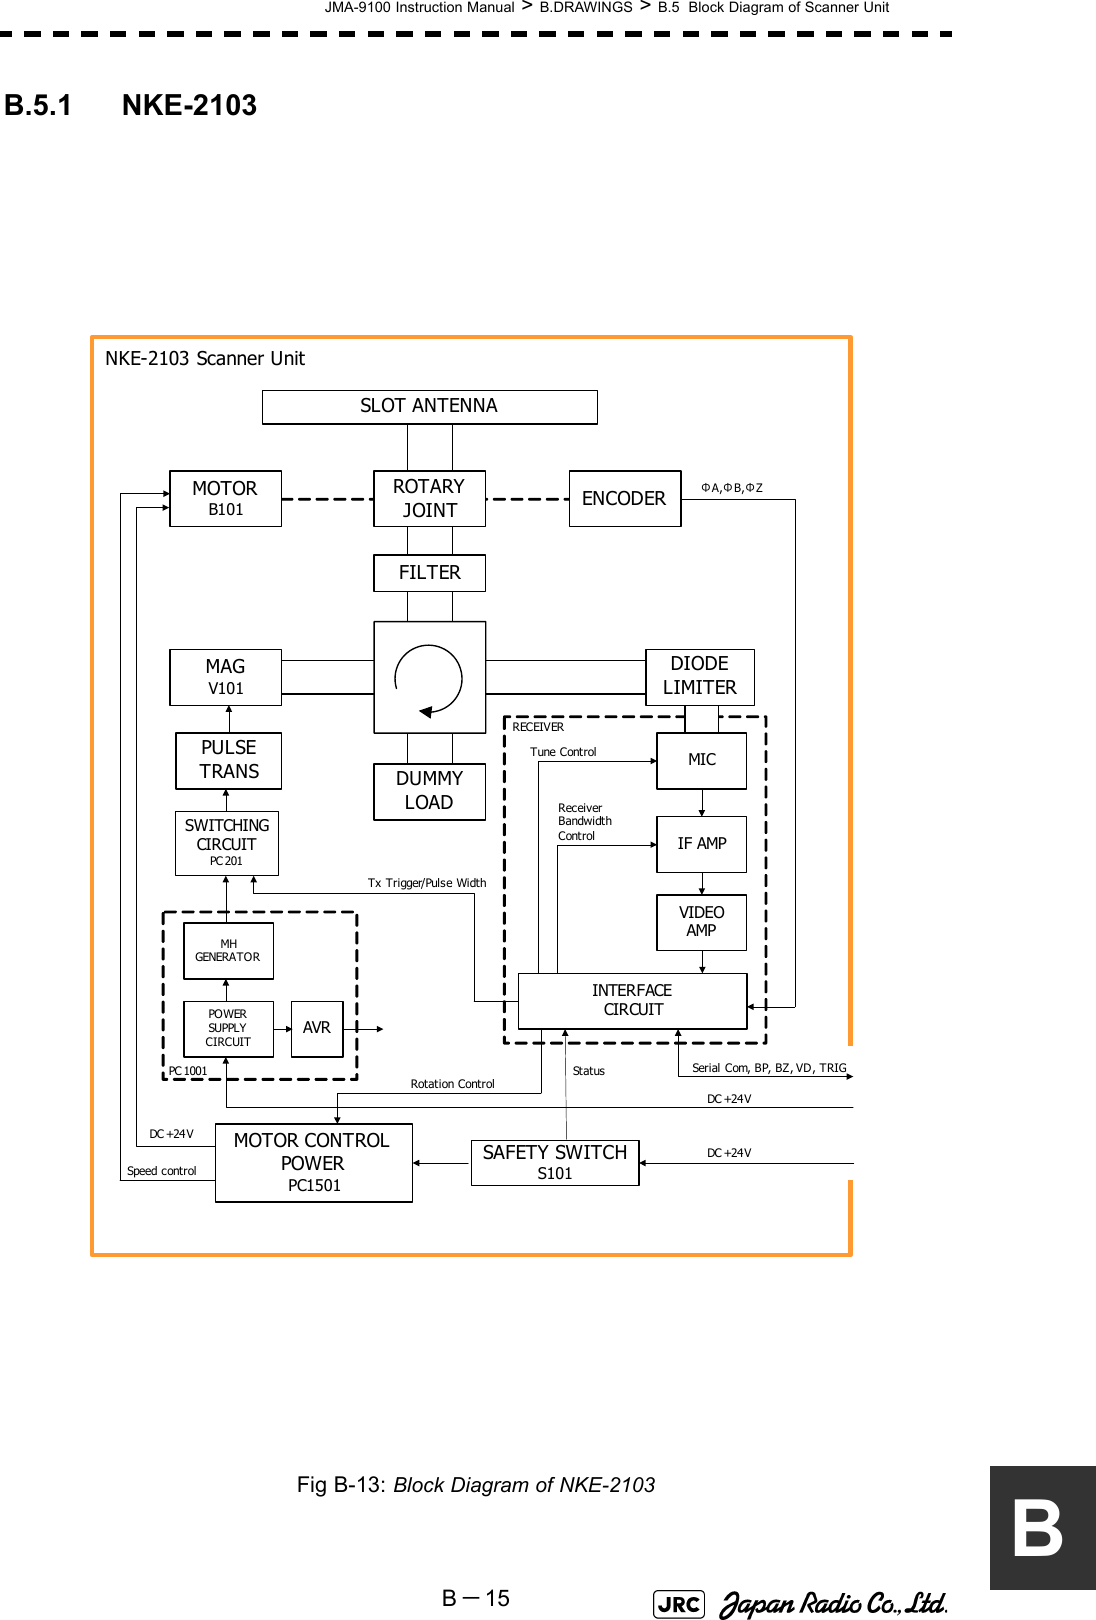 JMA-9100 Instruction Manual &gt; B.DRAWINGS &gt; B.5  Block Diagram of Scanner UnitB－15BB.5.1 NKE-2103Fig B-13: Block Diagram of NKE-2103SLOT ANTENNAMOTORB101SAFETY SWITCHS101MAGV101PULSETRANSSWITCHINGCIRCUITPC 201MHGENERATORAVRINTERFACE CIRCUITPC 1001MICIF AMPVIDEO AMPRECEIVERReceiver BandwidthControlTune Cont rolΦA,ΦB,ΦZFILTERDUMMYLOADDC +24 VSerial Com, BP, BZ, VD, TRIGNKE-2103 Scanner UnitPOWER SUPPLYCIRCUITMOTOR CONTROLPOWERPC1501Rotation ControlSpeed controlStatusDC +24 VTx Trigger/Pul se WidthDC +24 VDIODELIMITERENCODERROTARYJOINT